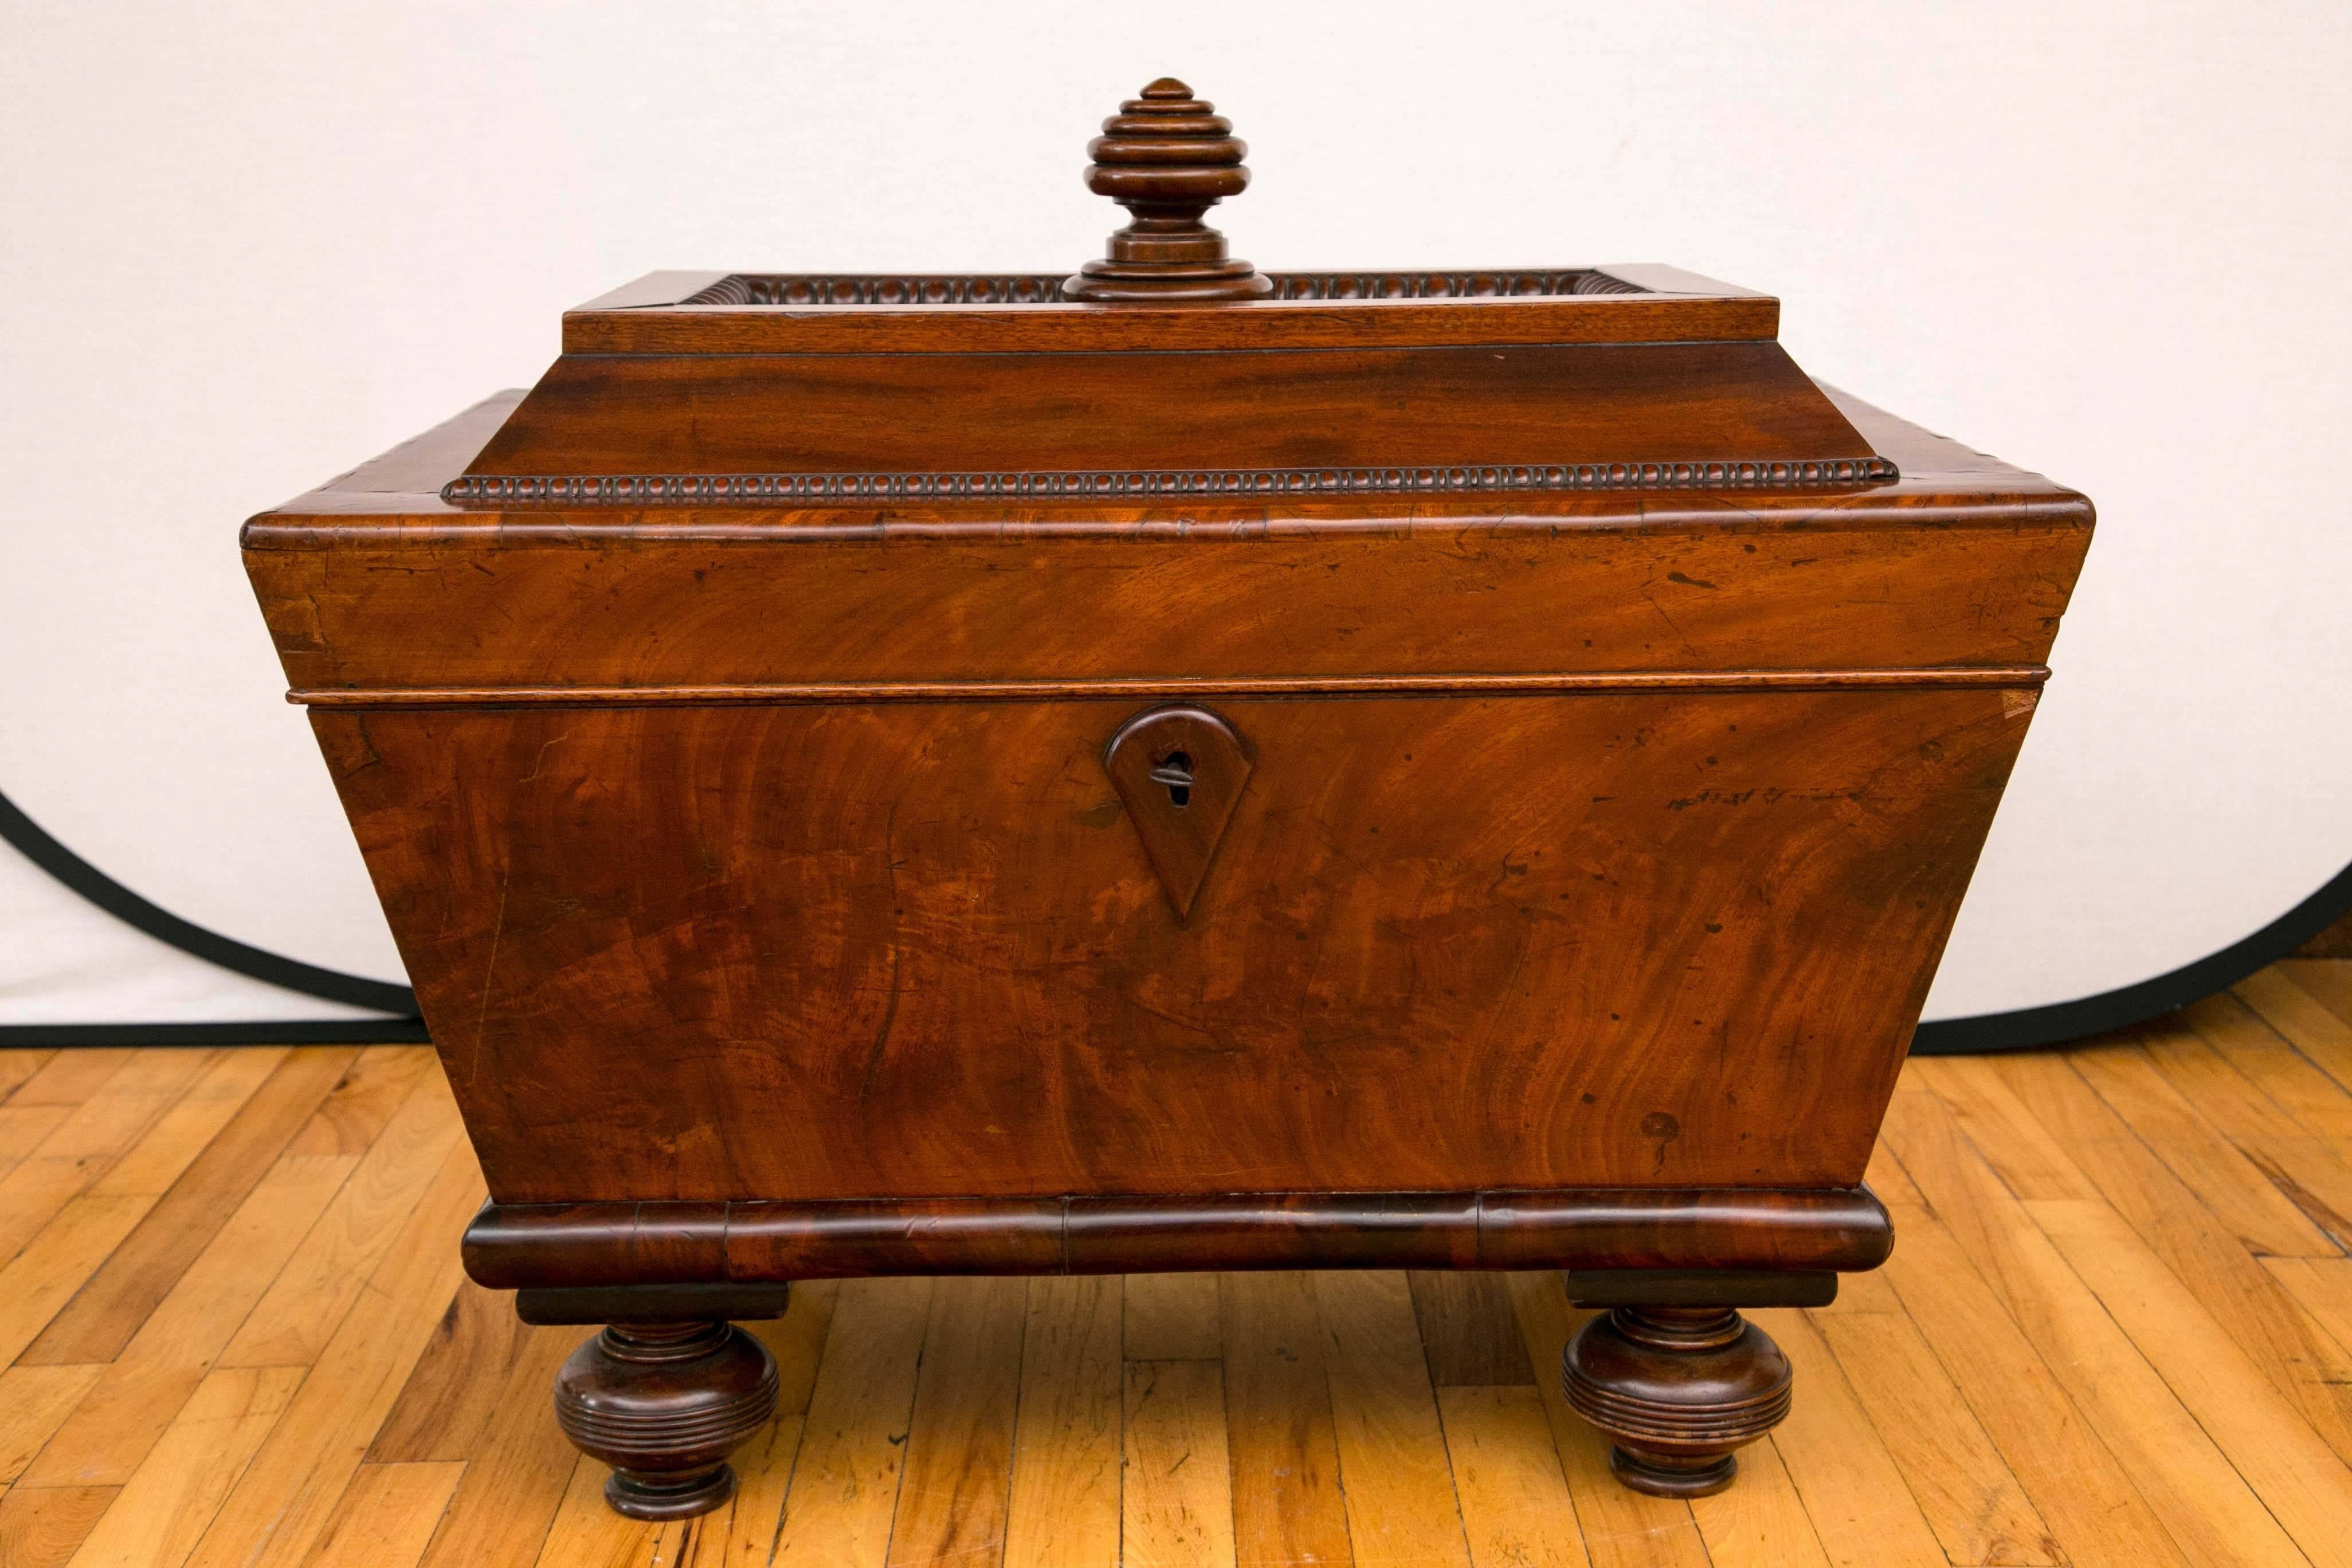 An early 19th century mahogany wine cooler of sarcophagus form, the raised hinged top above the body with recessed panels on a platform base with turned ball feet. The raised top surface is defined by a turned "honeycomb" finial. Each side